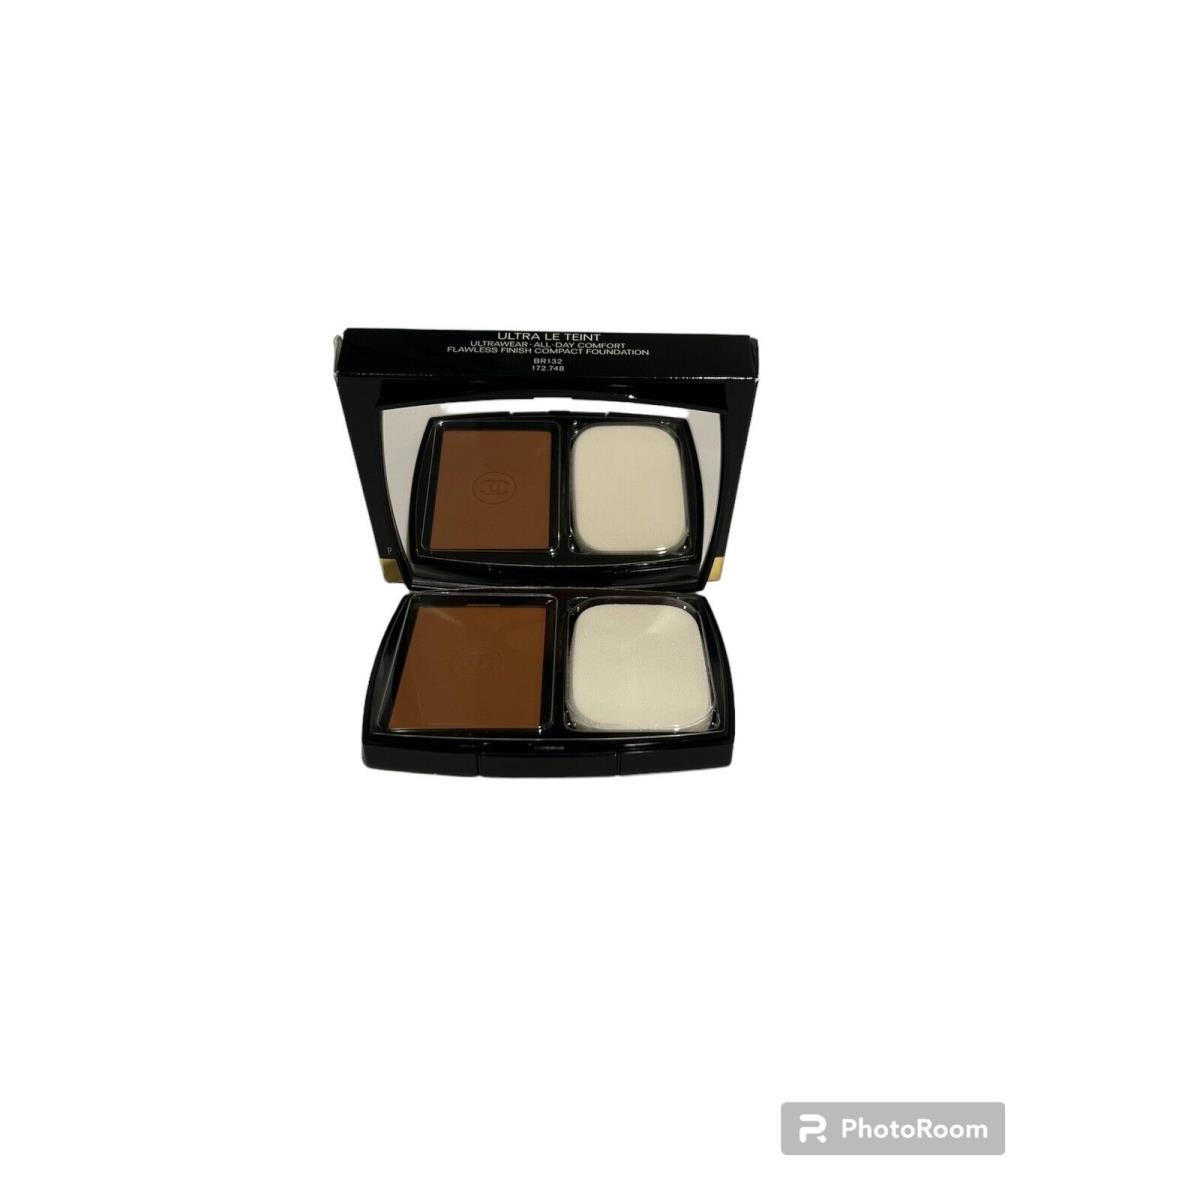 Chanel Ultra Le Teint Flawless Finish Compact Foundation - BR132